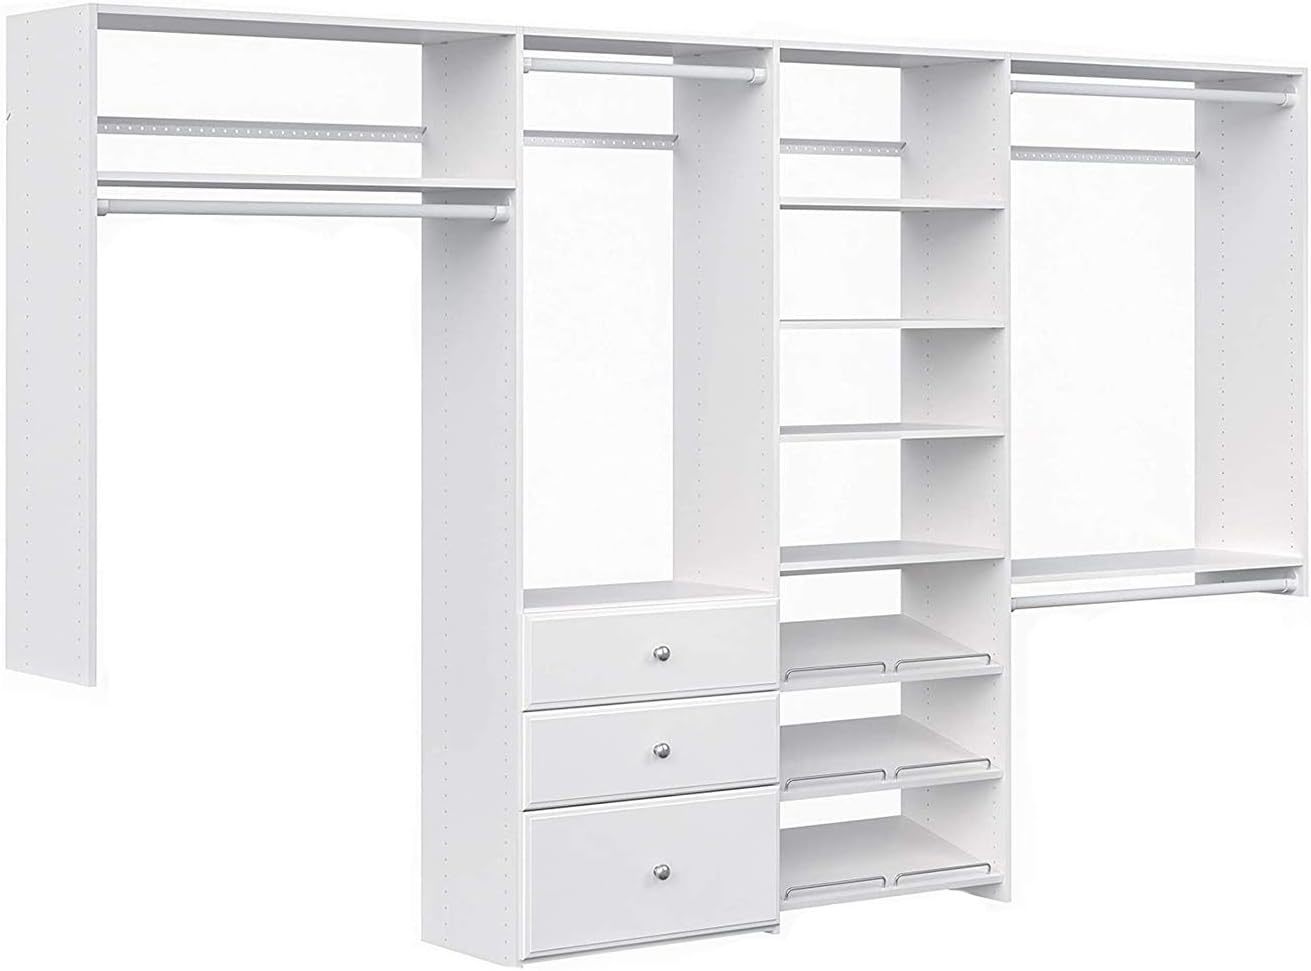 Wall Mounted Wardrobe Organizer Kit System with Shelves and Drawers